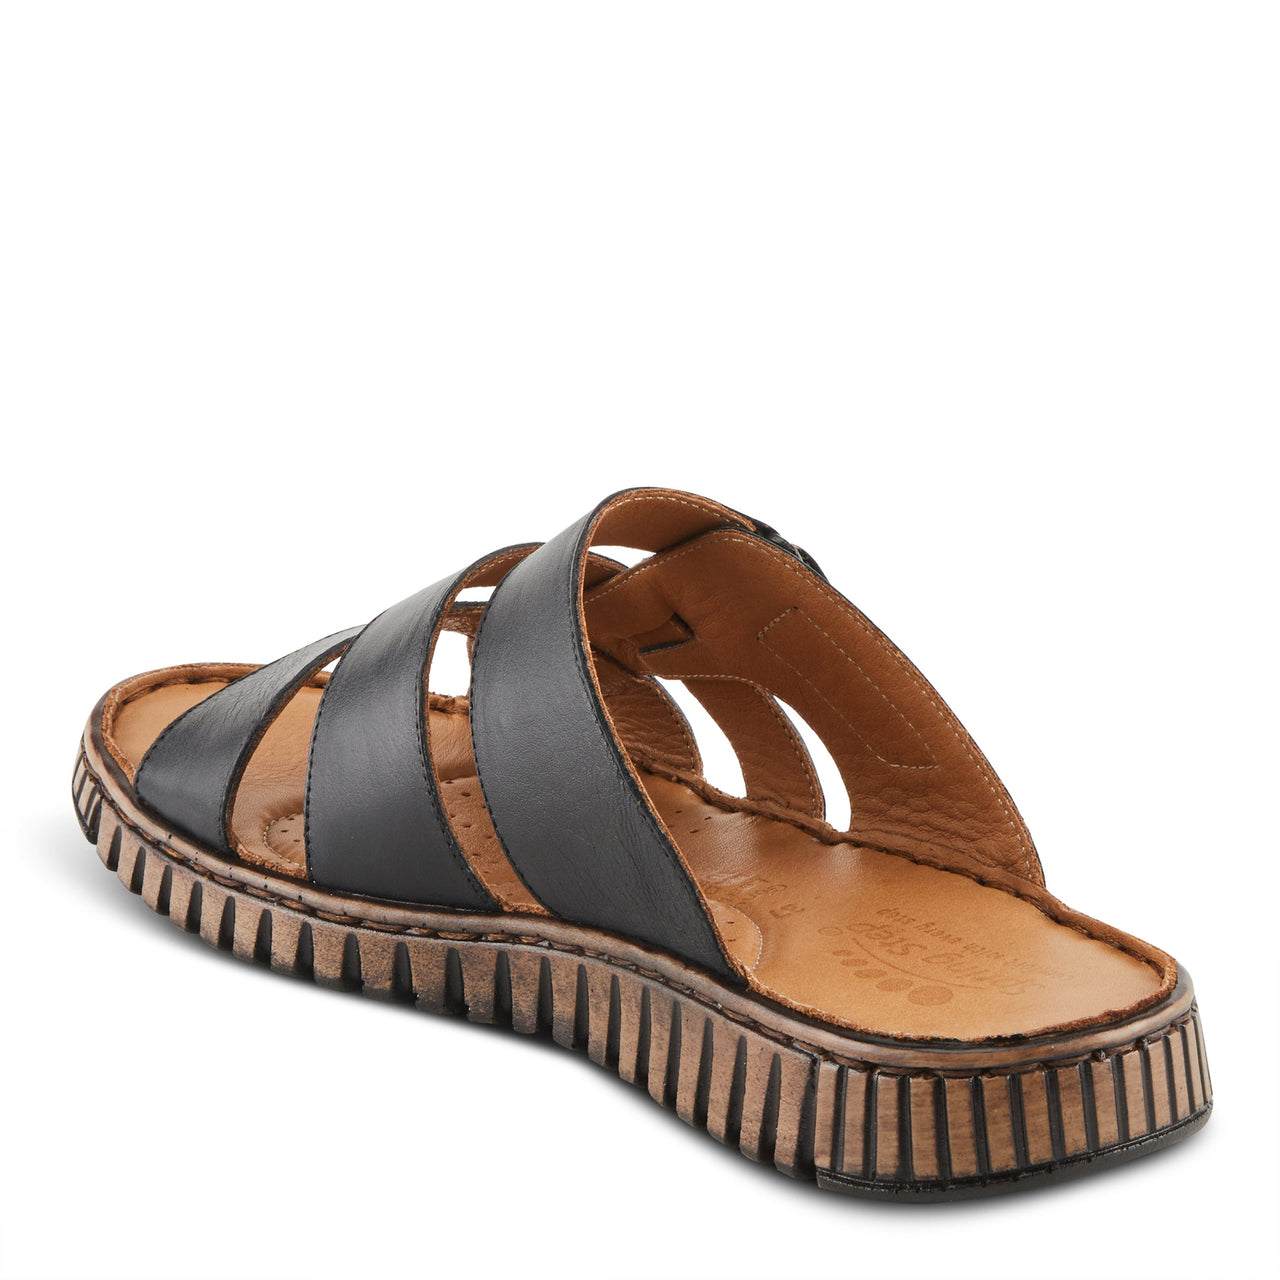 A close-up image of the Spring Step Olly Sandals in a beautiful tan color, featuring a stylish crisscross design and comfortable cushioned insoles perfect for all-day wear